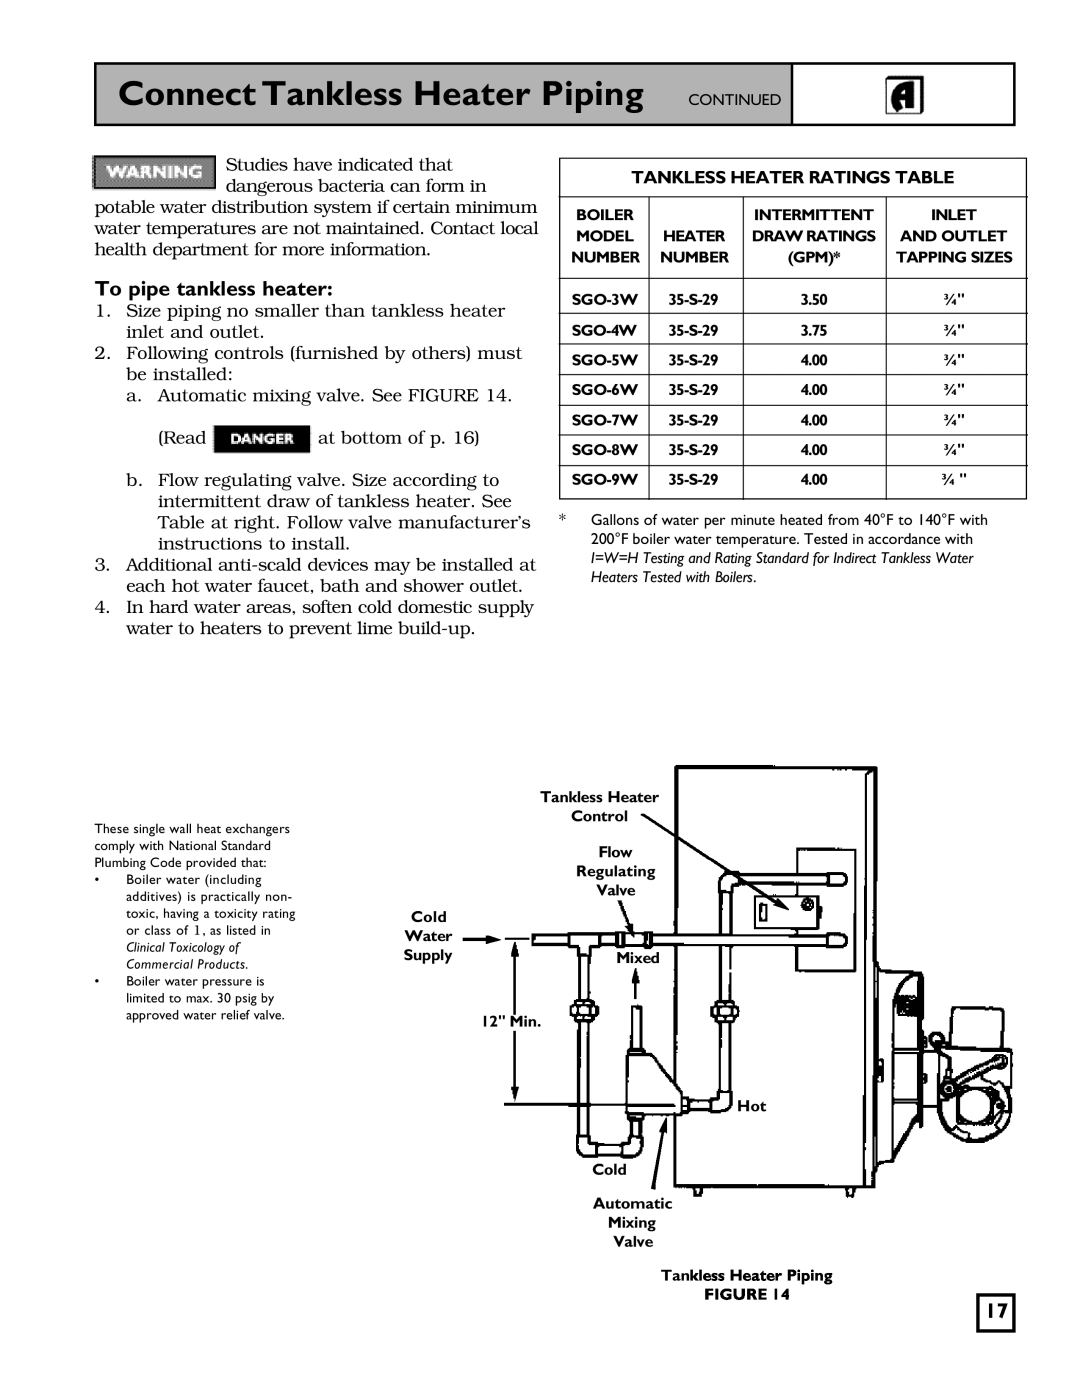 Weil-McLain SGO-W SERIES 3 OIL-FIRED NATURAL DRAFT WATER BOILER, 550-141-827/1201 Connect Tankless Heater Piping CONTINUED 